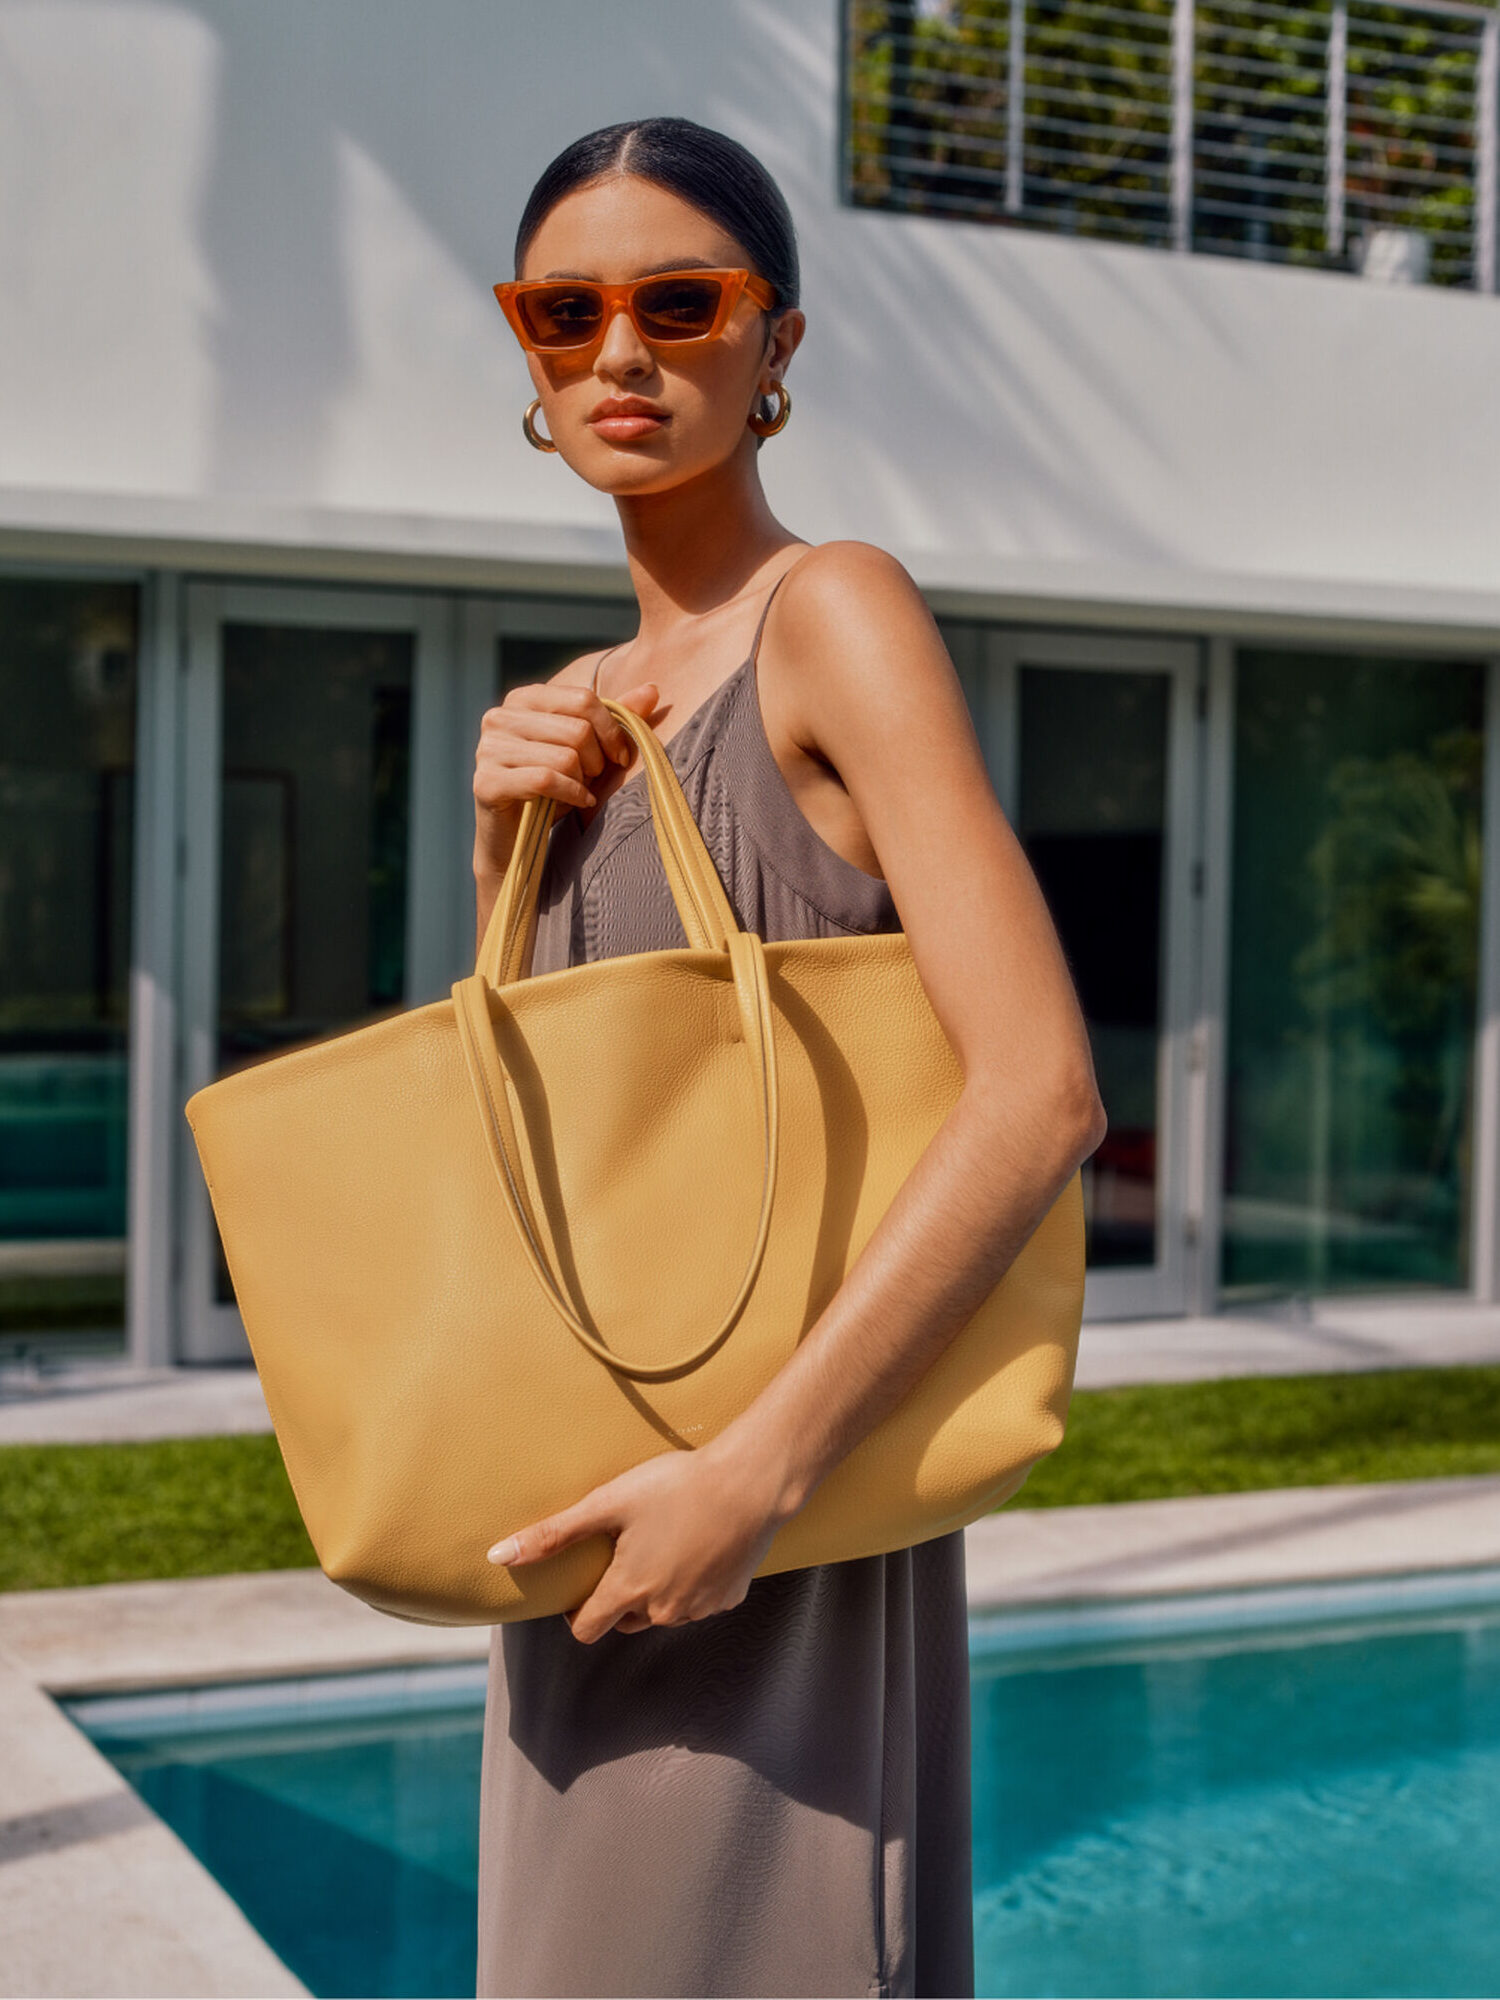 A model holds a yello bag in front of her body.